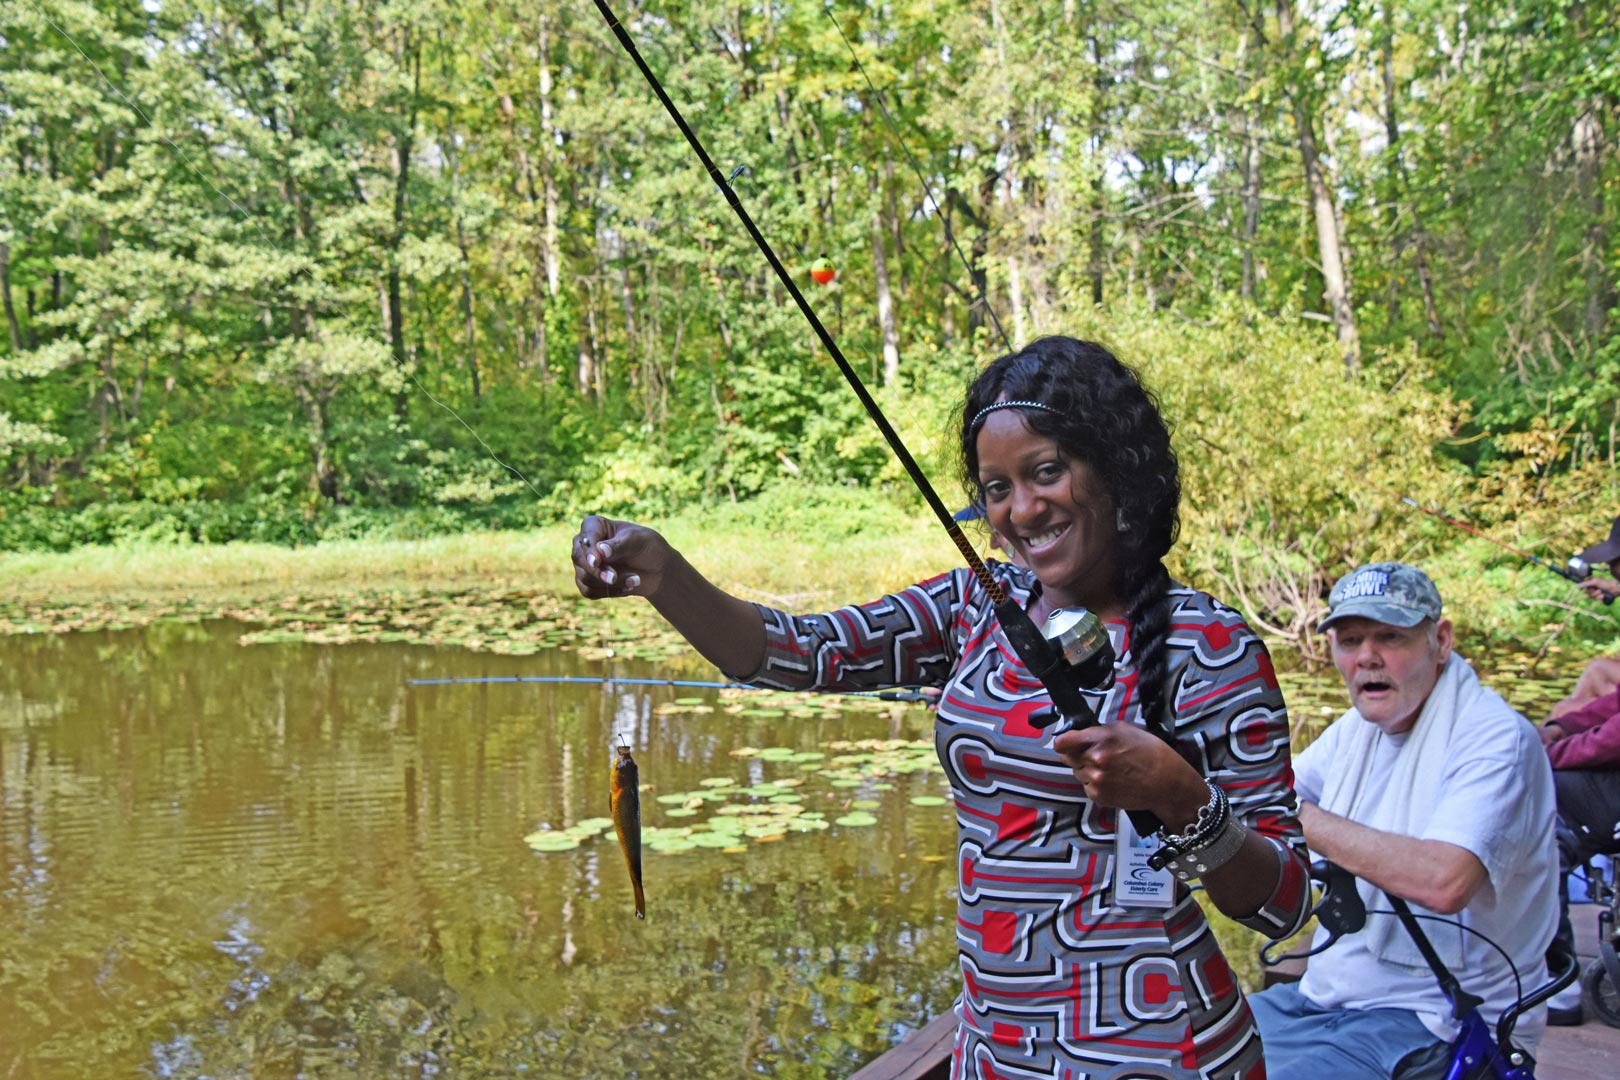 Fishing is a popular activity at our annual Senior Camp at Blacklick Woods. Photo by Angela Latham.